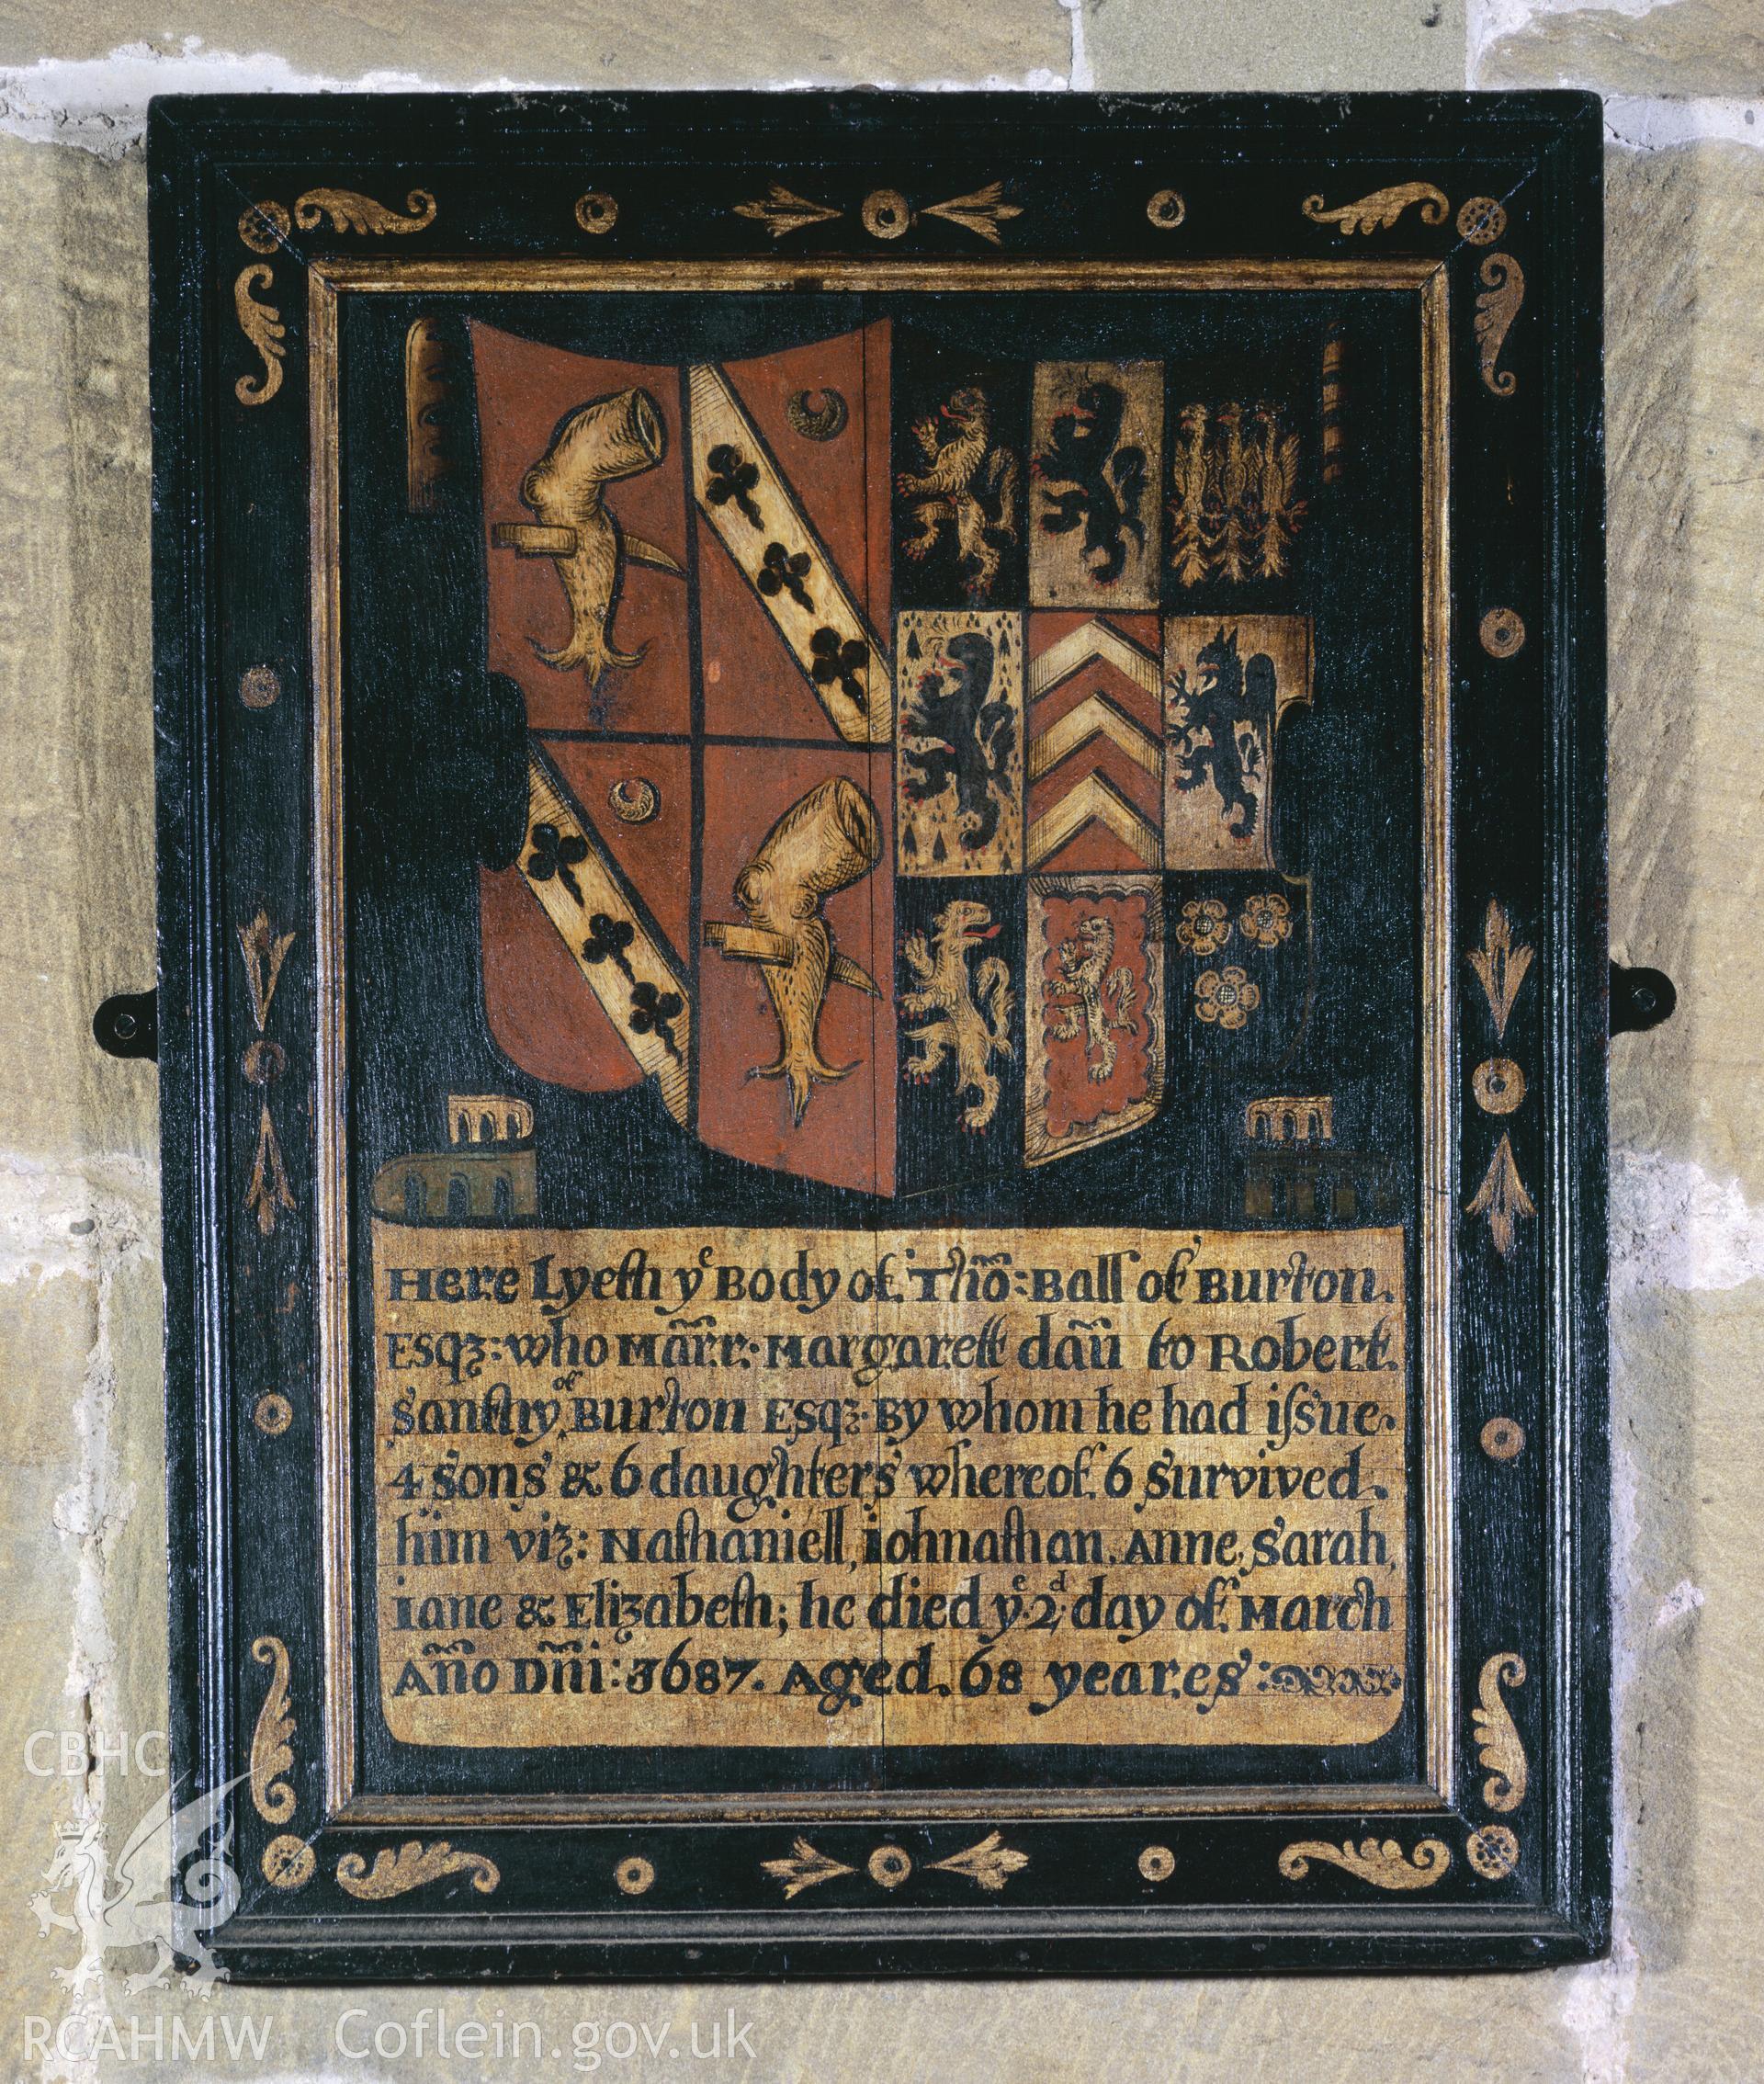 RCAHMW colour transparency showing memorial plaque to Thomas Ball at All Saints Church, Gresford, photographed by Iain Wright, 2001.